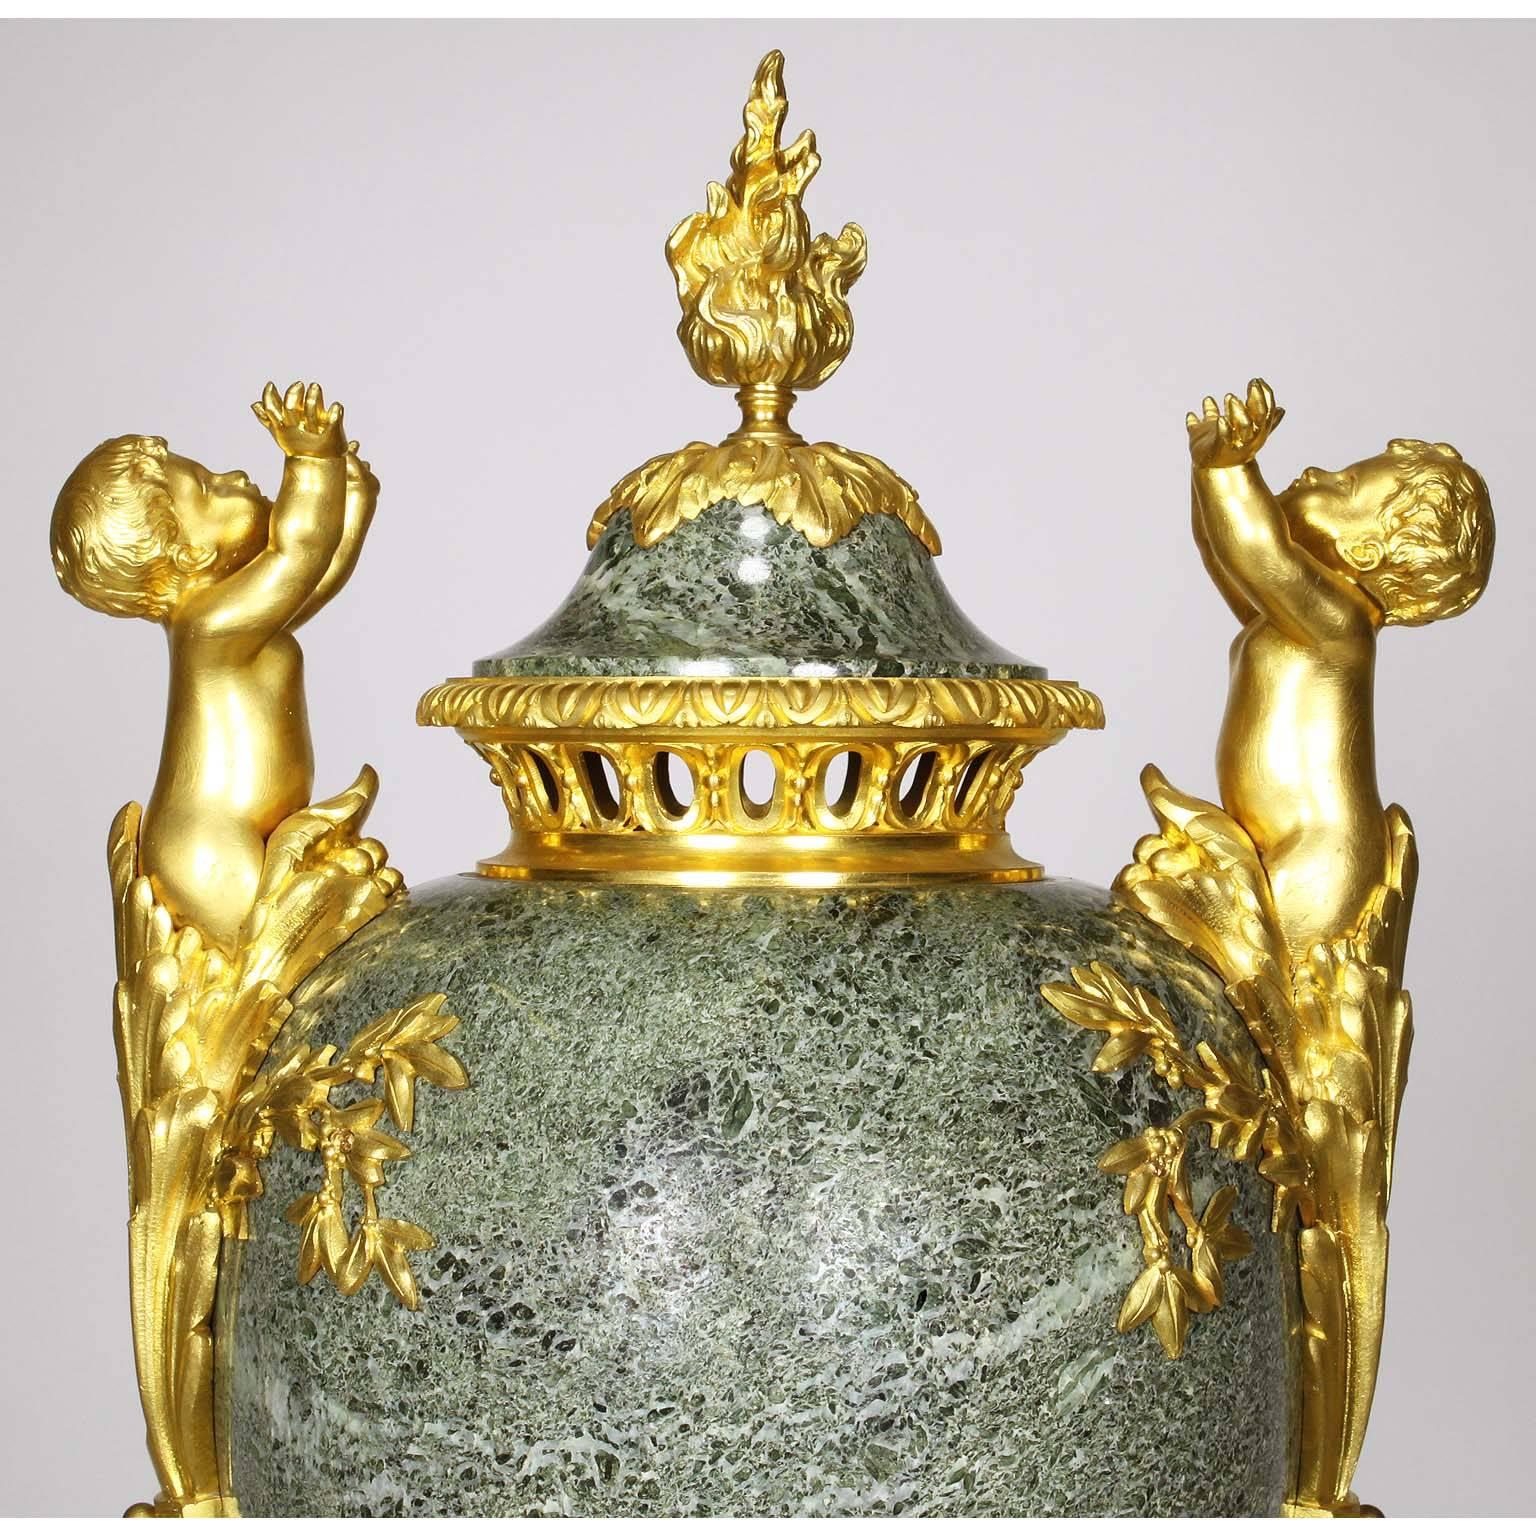 A fine French 19th-20th century Louis XVI style figural gilt bronze-mounted and Vert Maurin marble covered urn. The domed cover centred by a flambeau finial, the ovoid body flanked by a pair of Putti (children) terms with their arms raised, warming